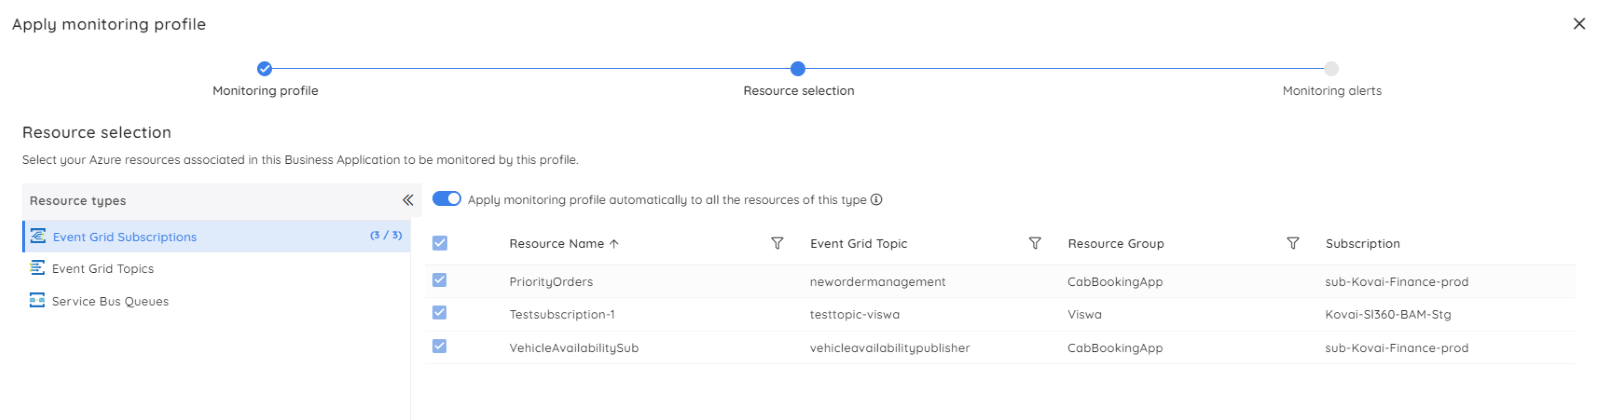 How to monitor Azure Event Grid dead letter using Turbo360?-5